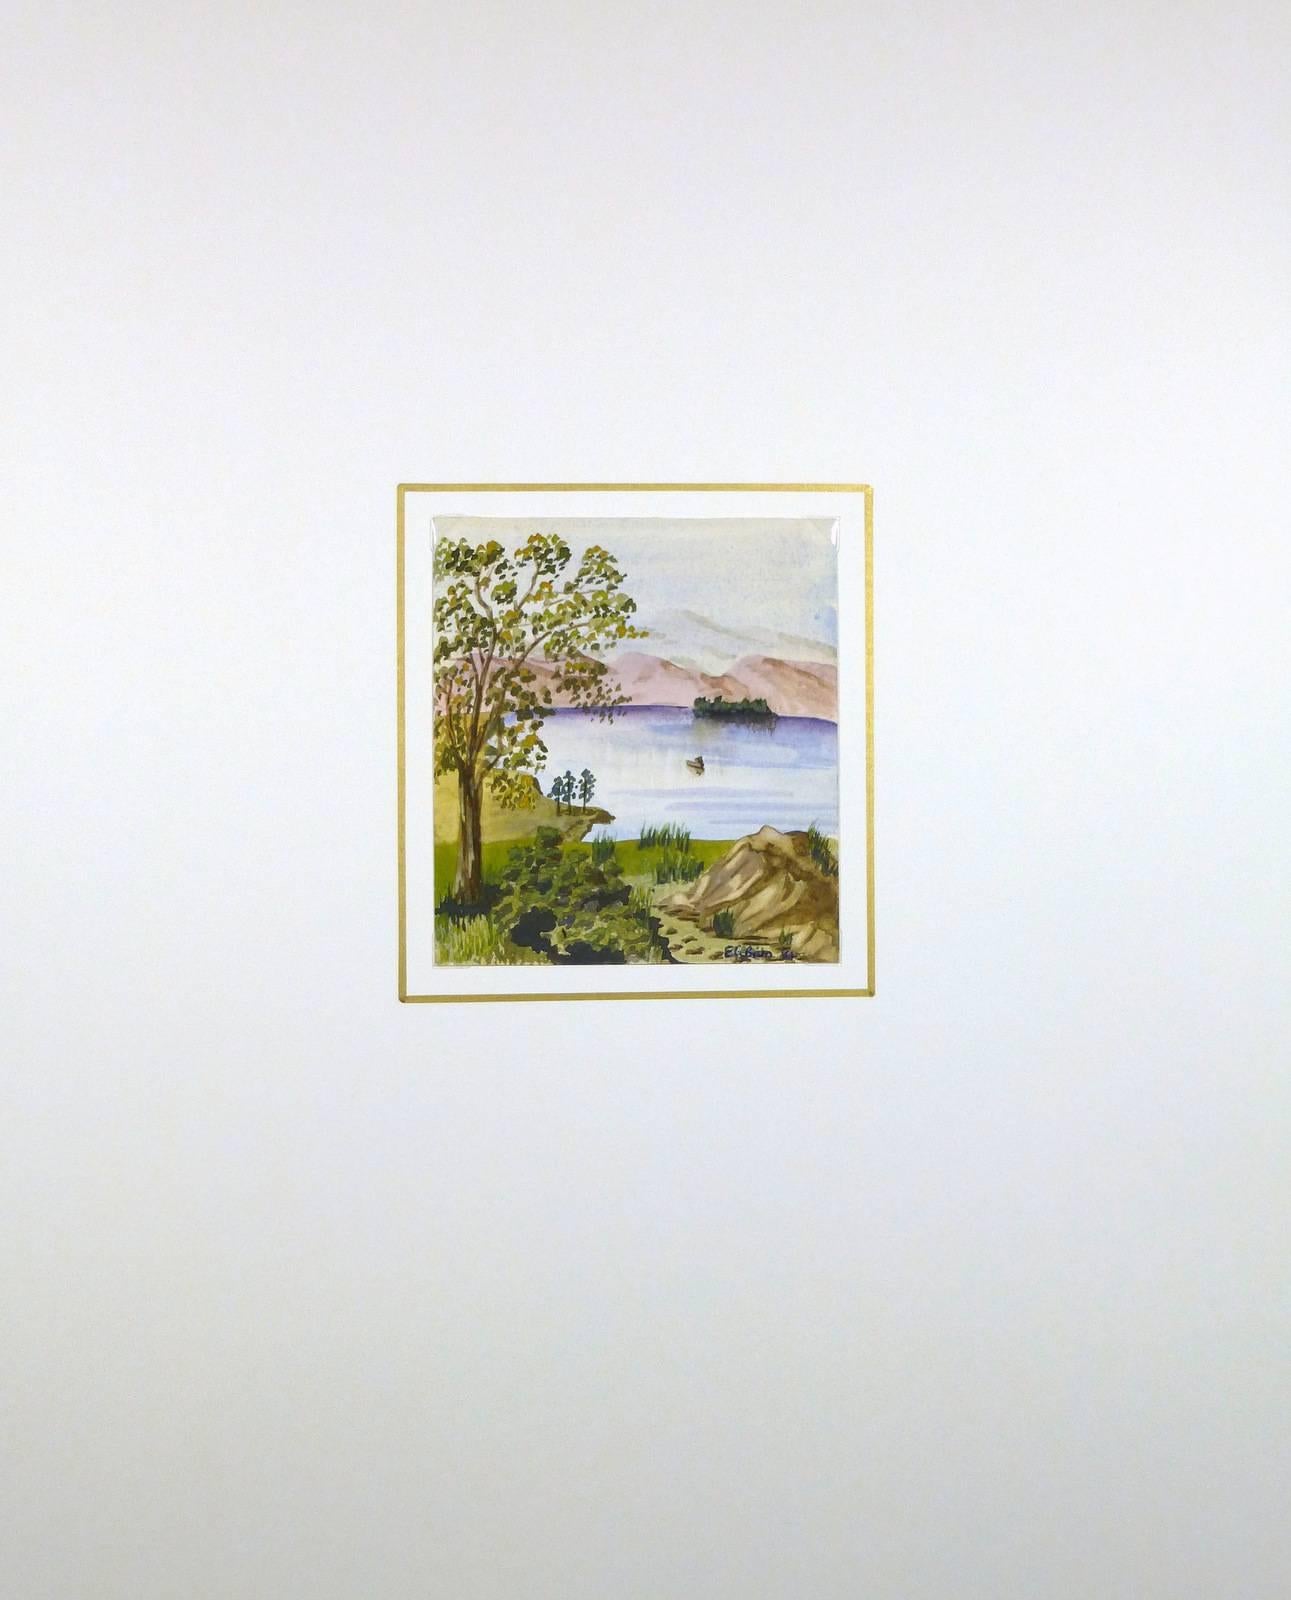 Peaceful watercolor of lake countryside by English artist EG Bain, 1984. Signed lower right.  

Original artwork on paper displayed on a white mat with a gold border. Archival plastic sleeve and Certificate of Authenticity included. Artwork, 5.25”H